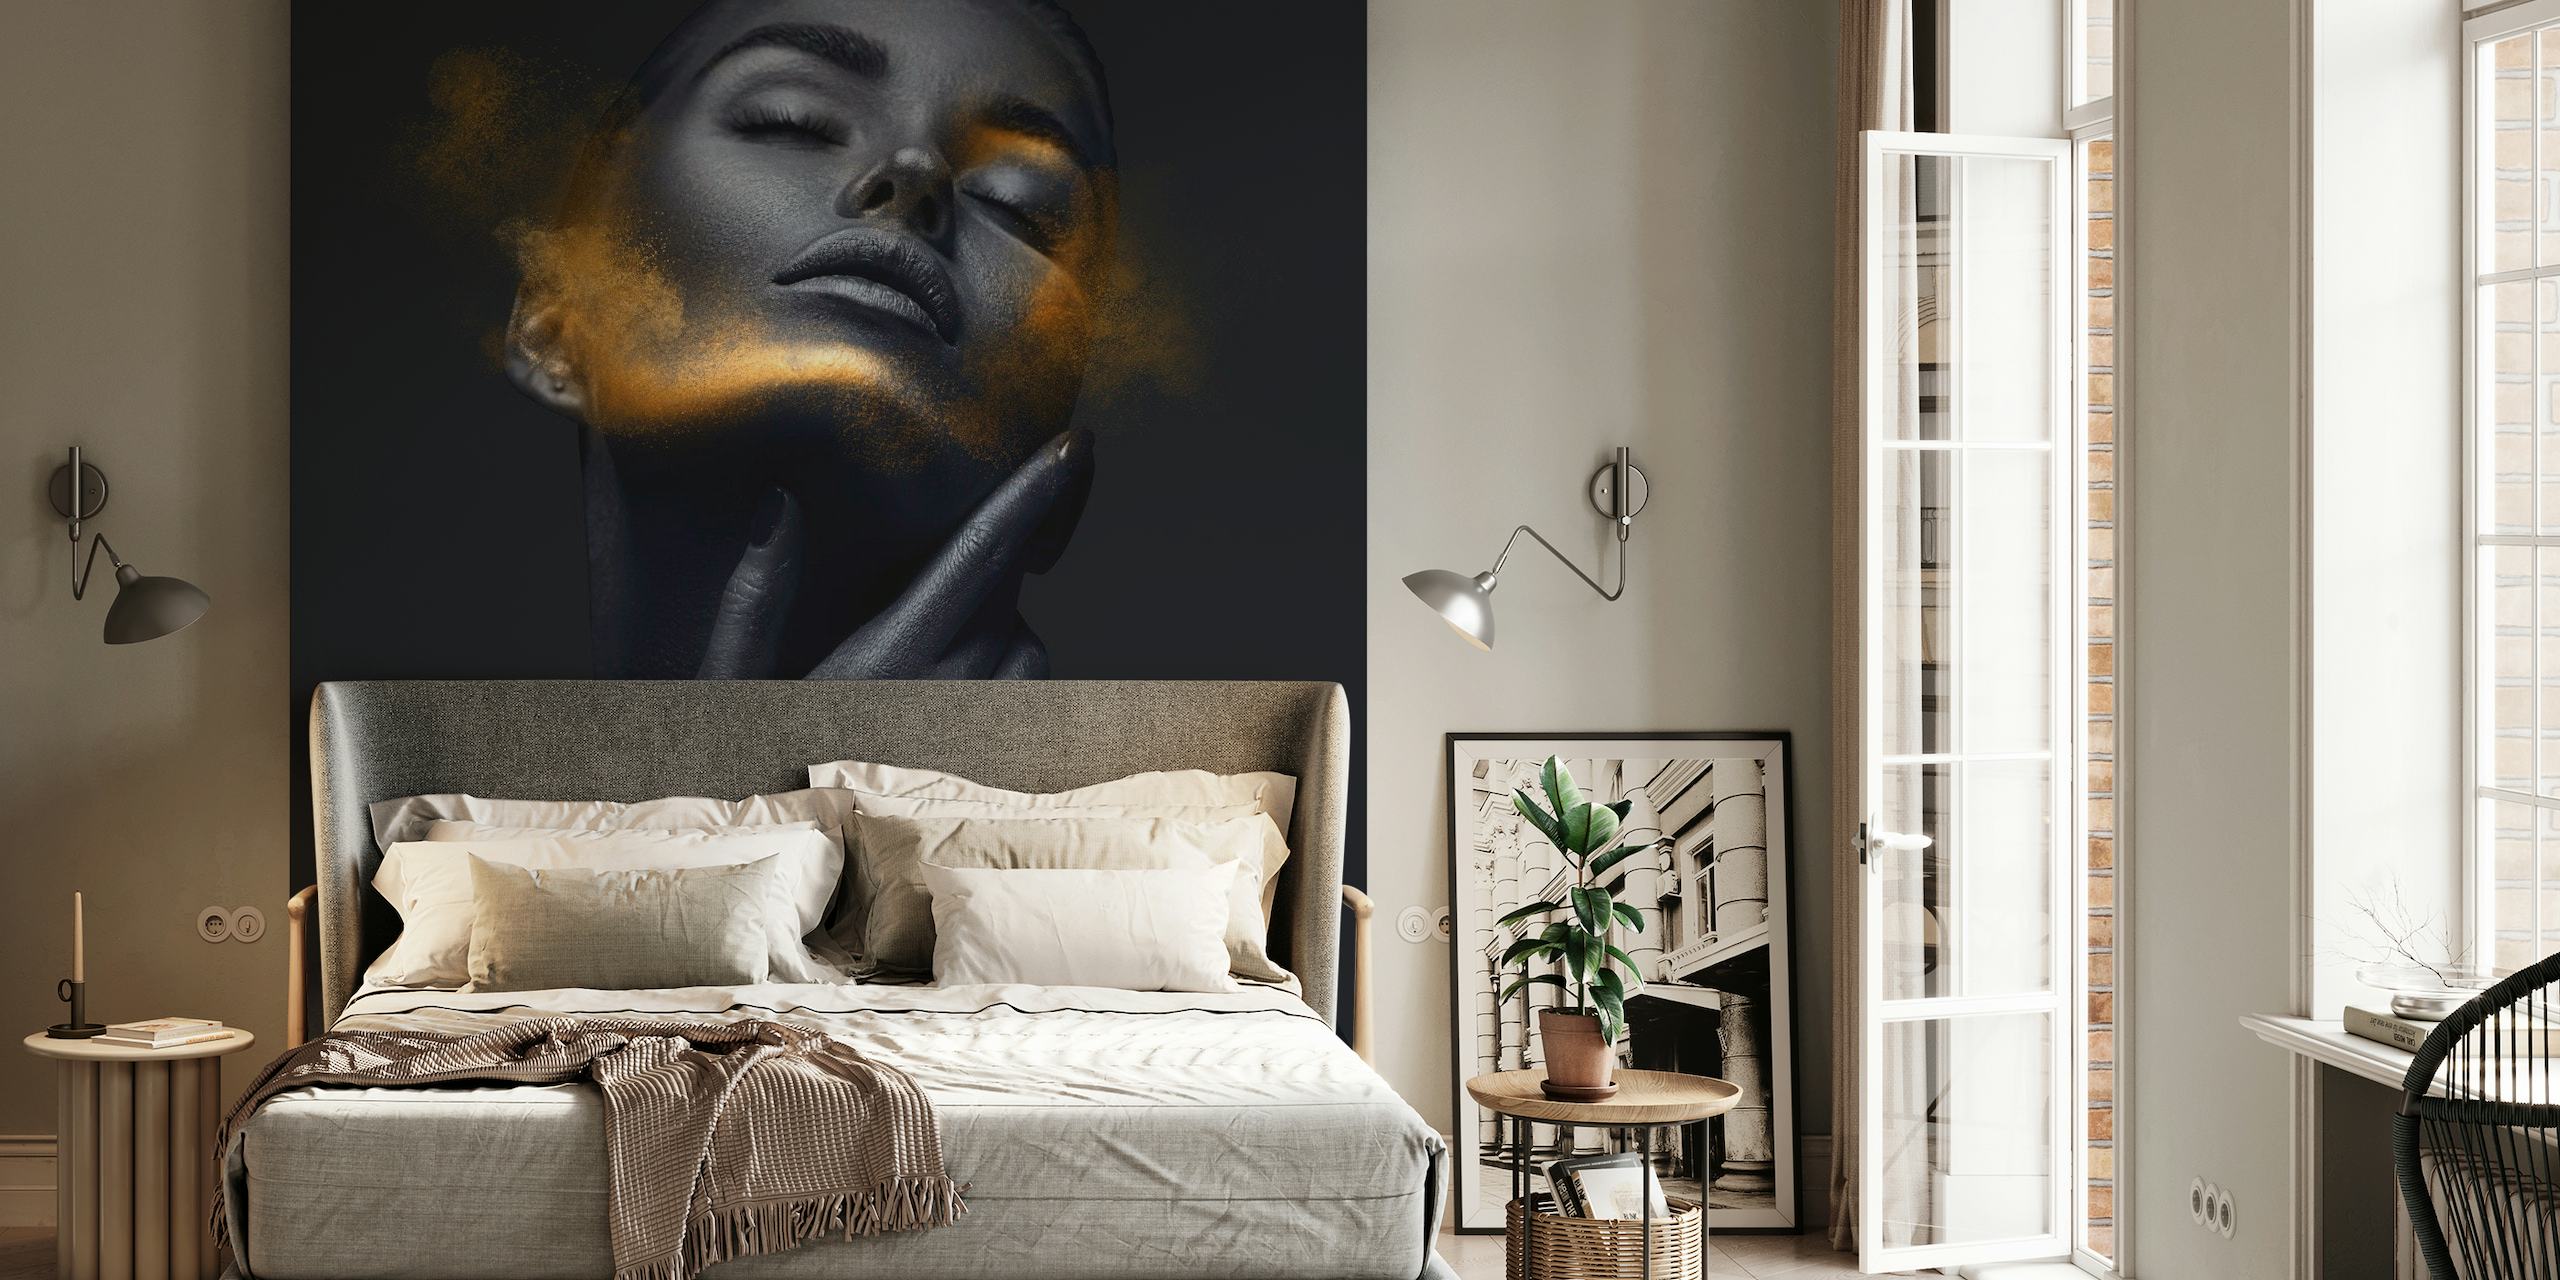 Gold Girl 3 wall mural with an artistic rendering of a woman in gold and black tones